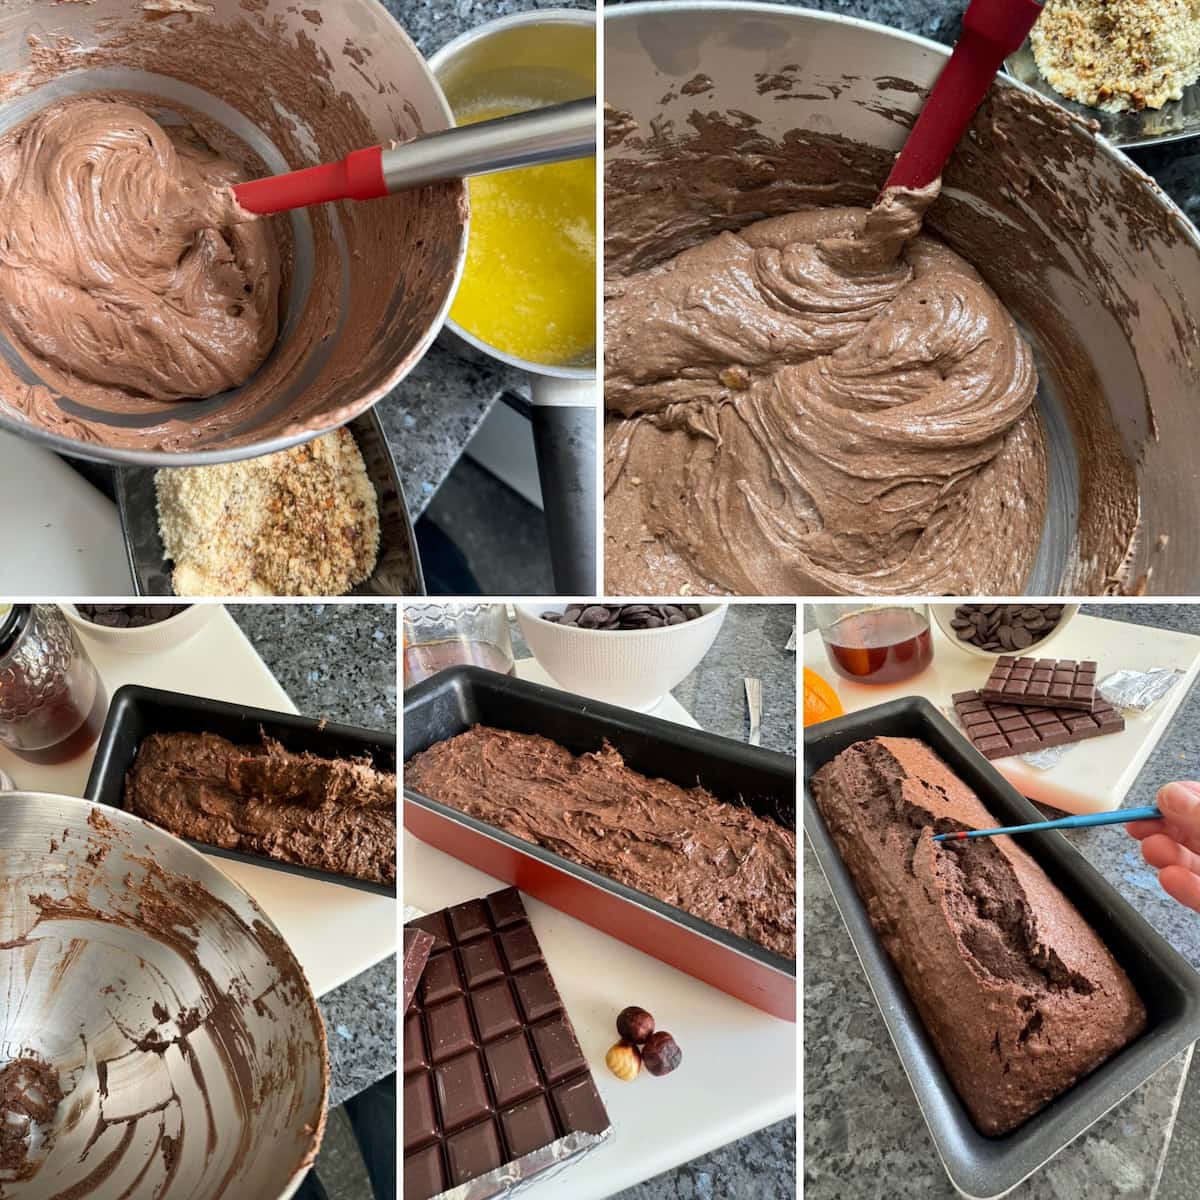 steps of folding melted butter and ground hazelnuts into the chocolate batter and transfer to a cake tin